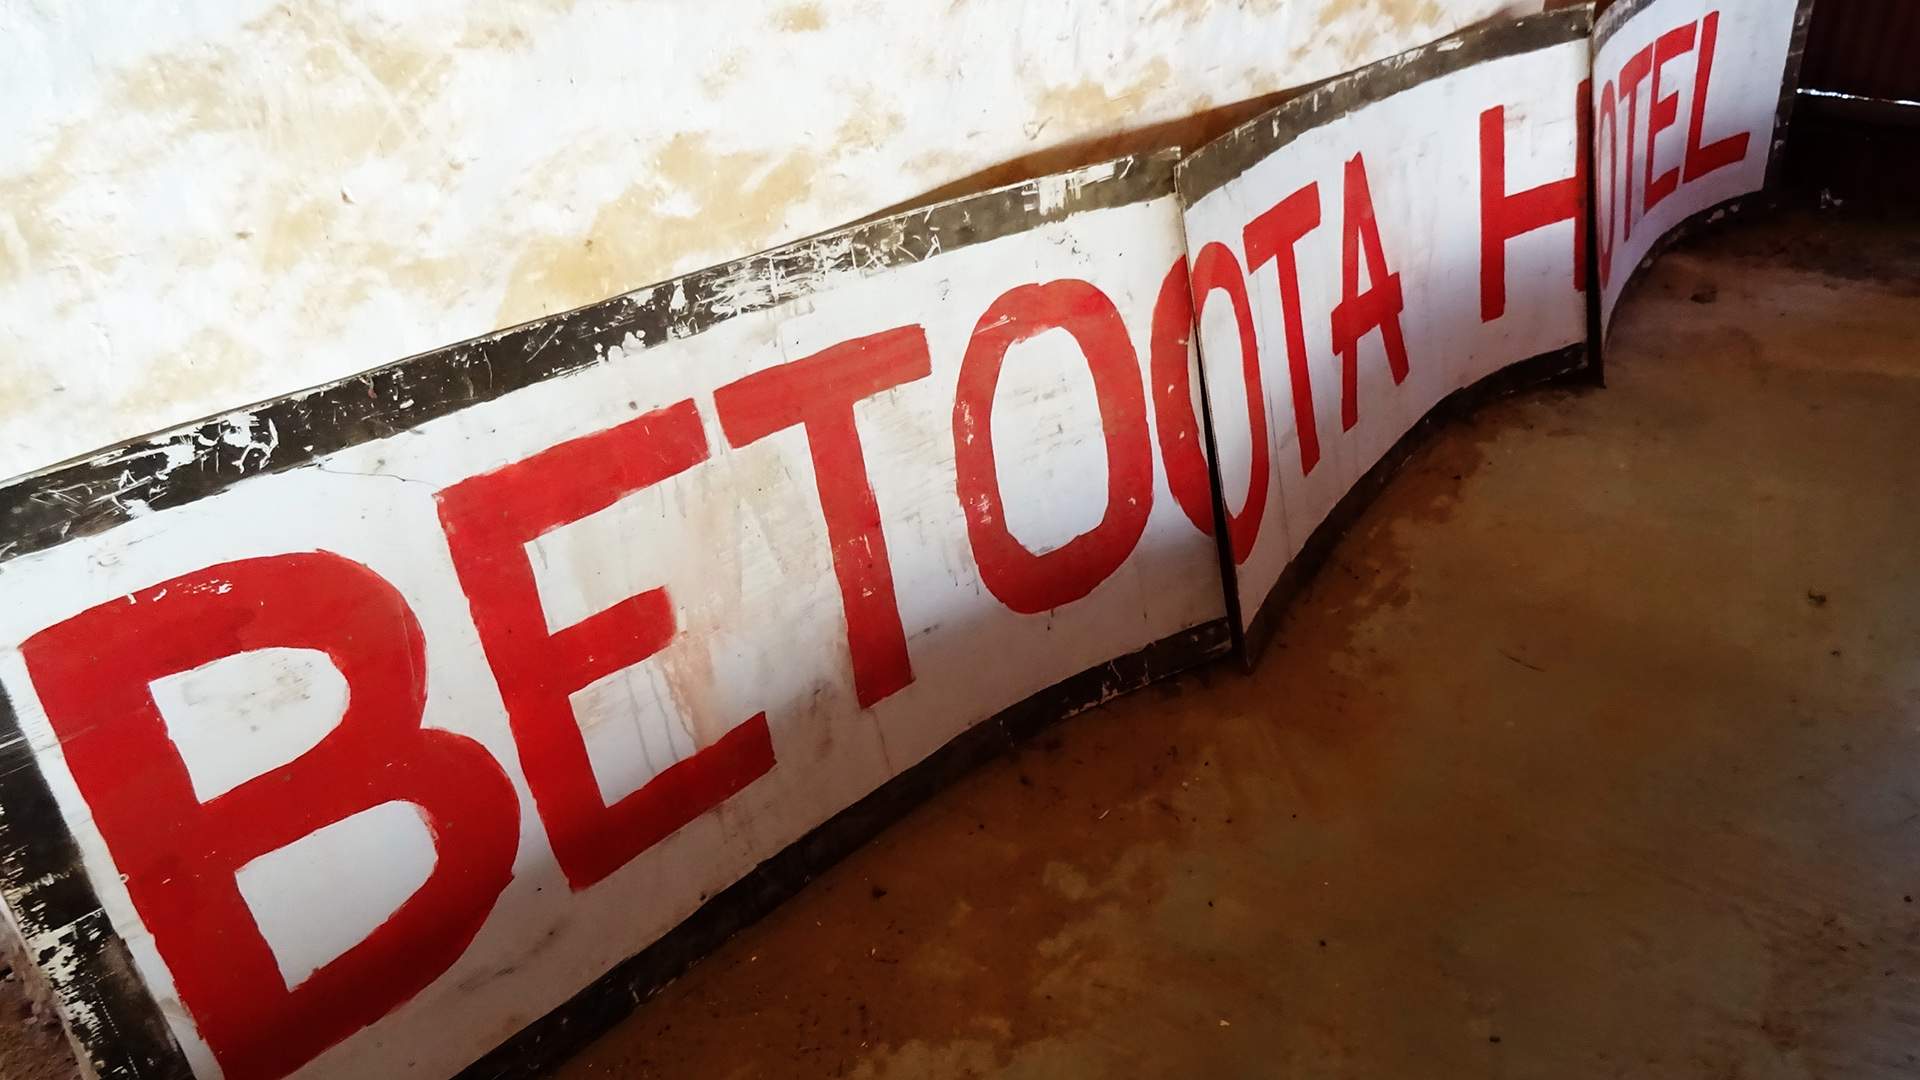 Outback Queensland's Iconic Betoota Hotel Is Set to Reopen